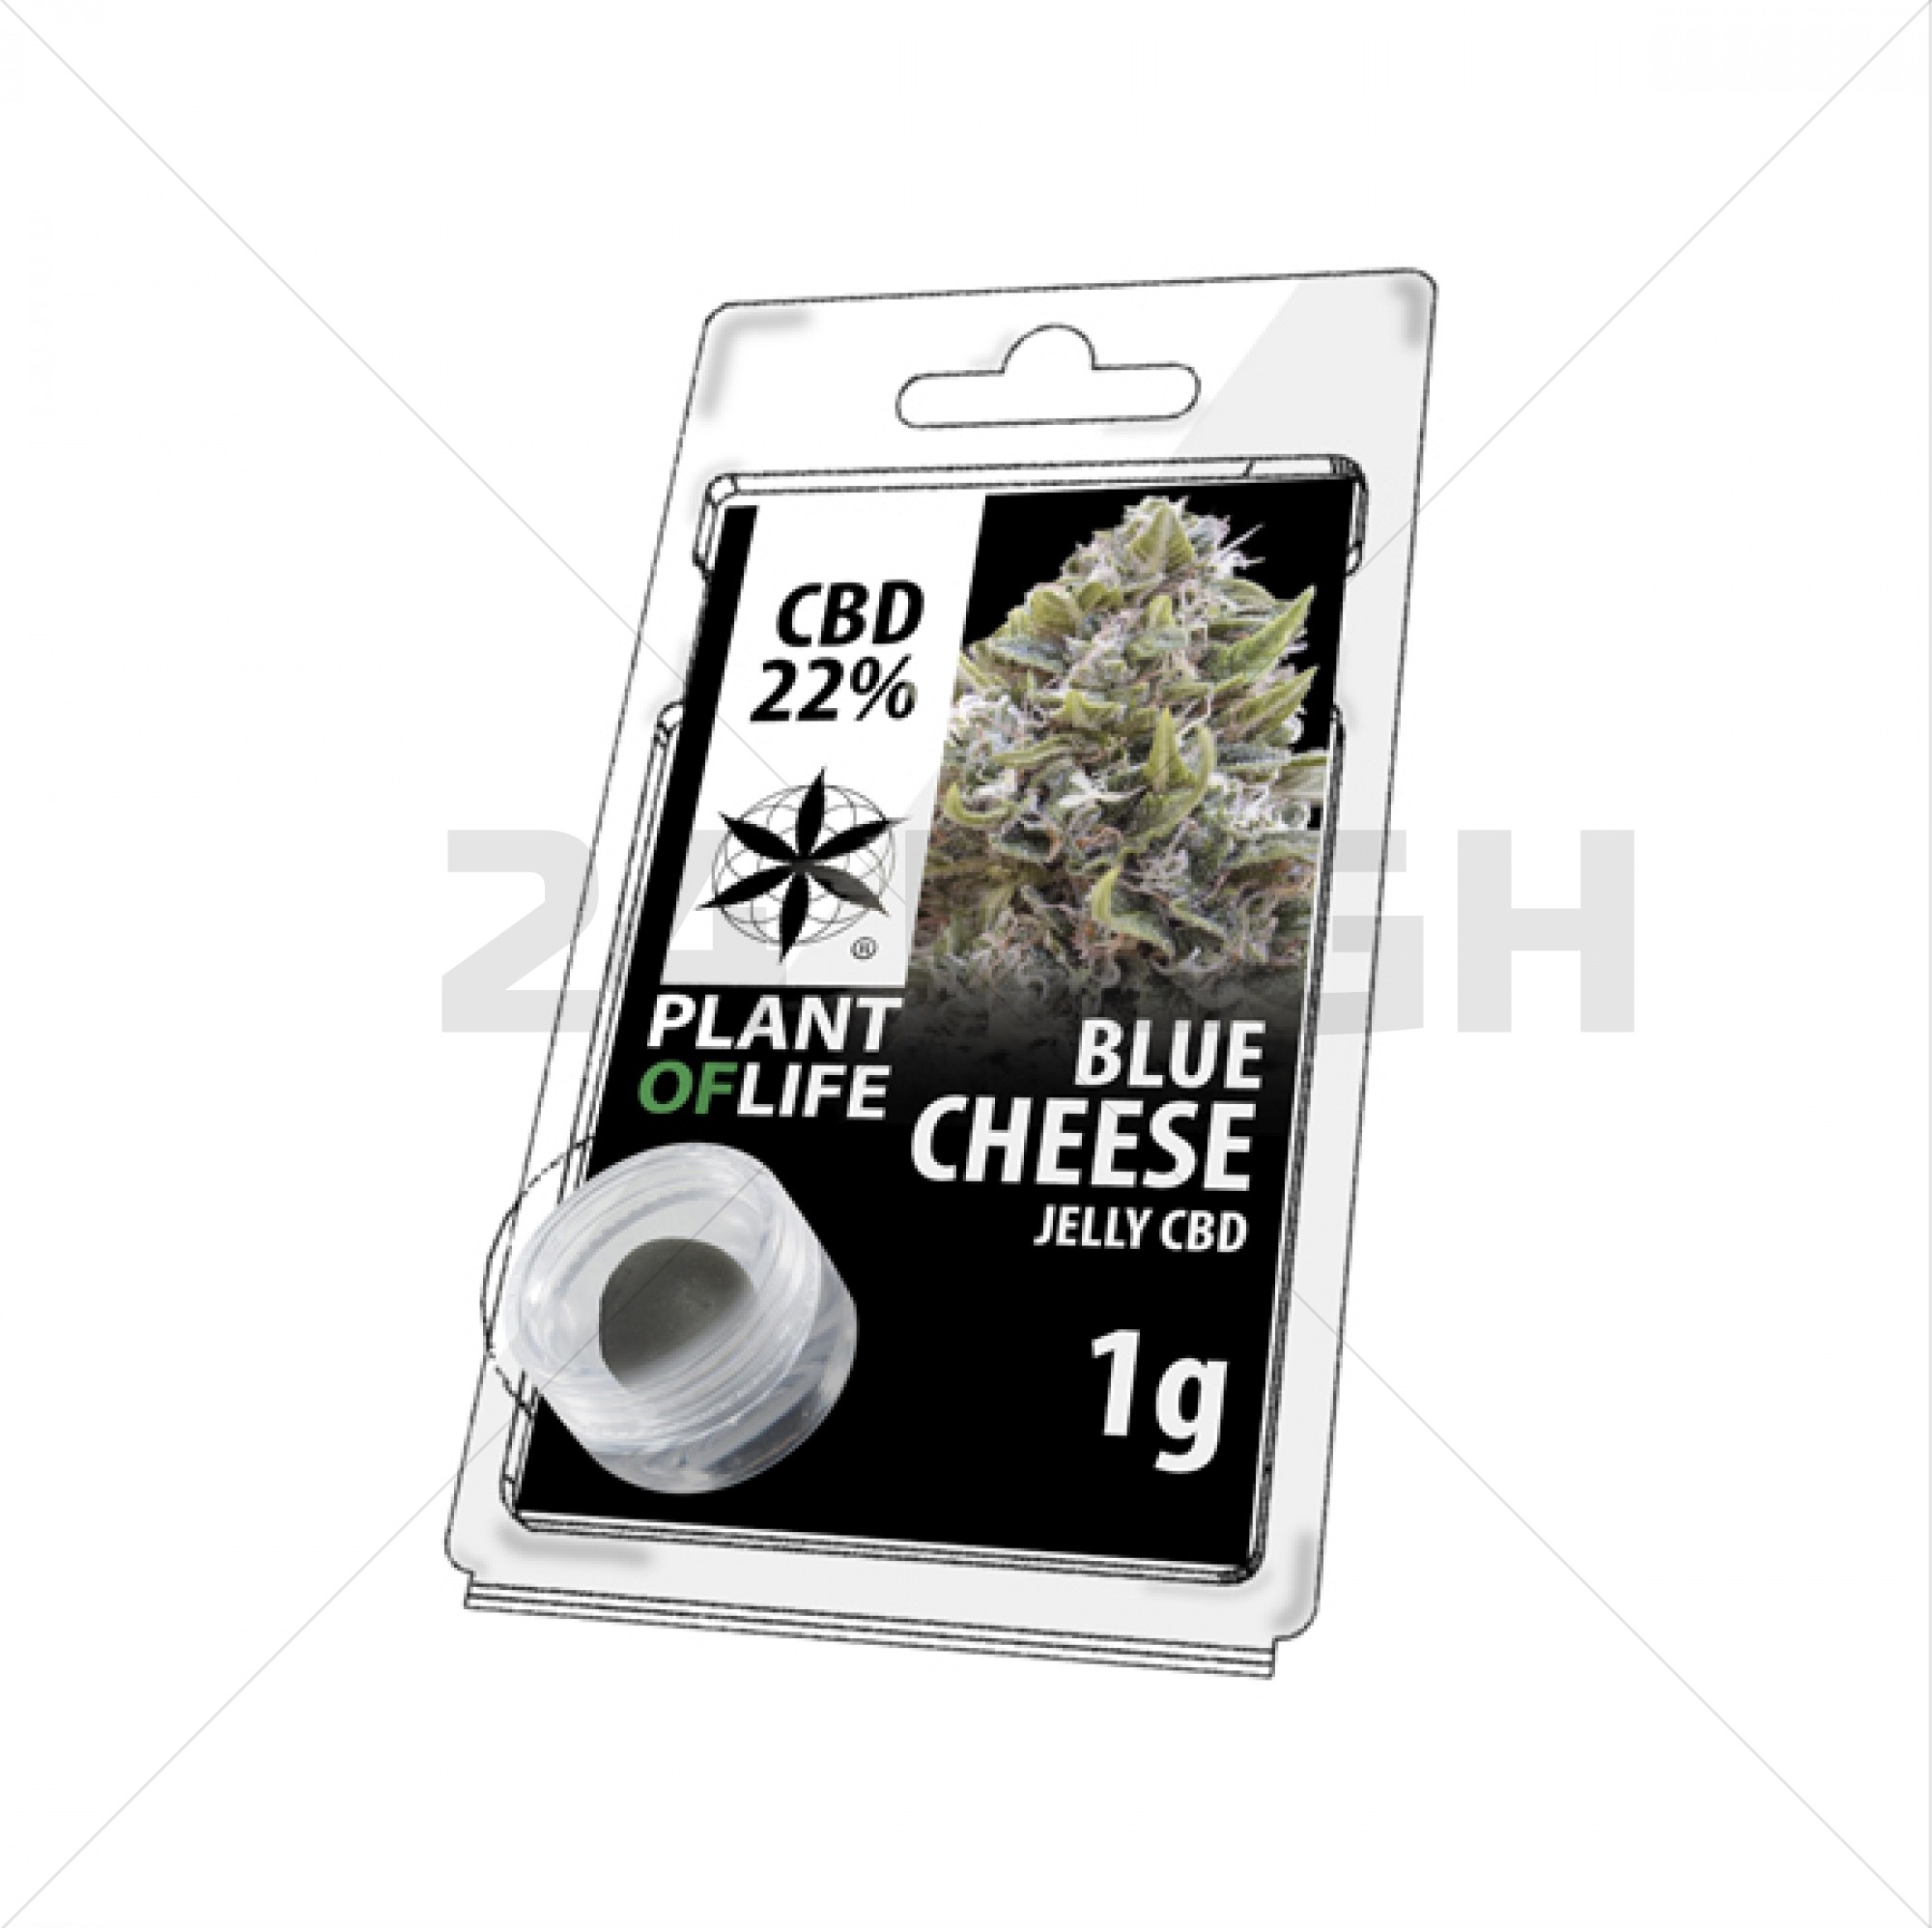 Jelly 22% CBD Blue Cheese Extraction 1G